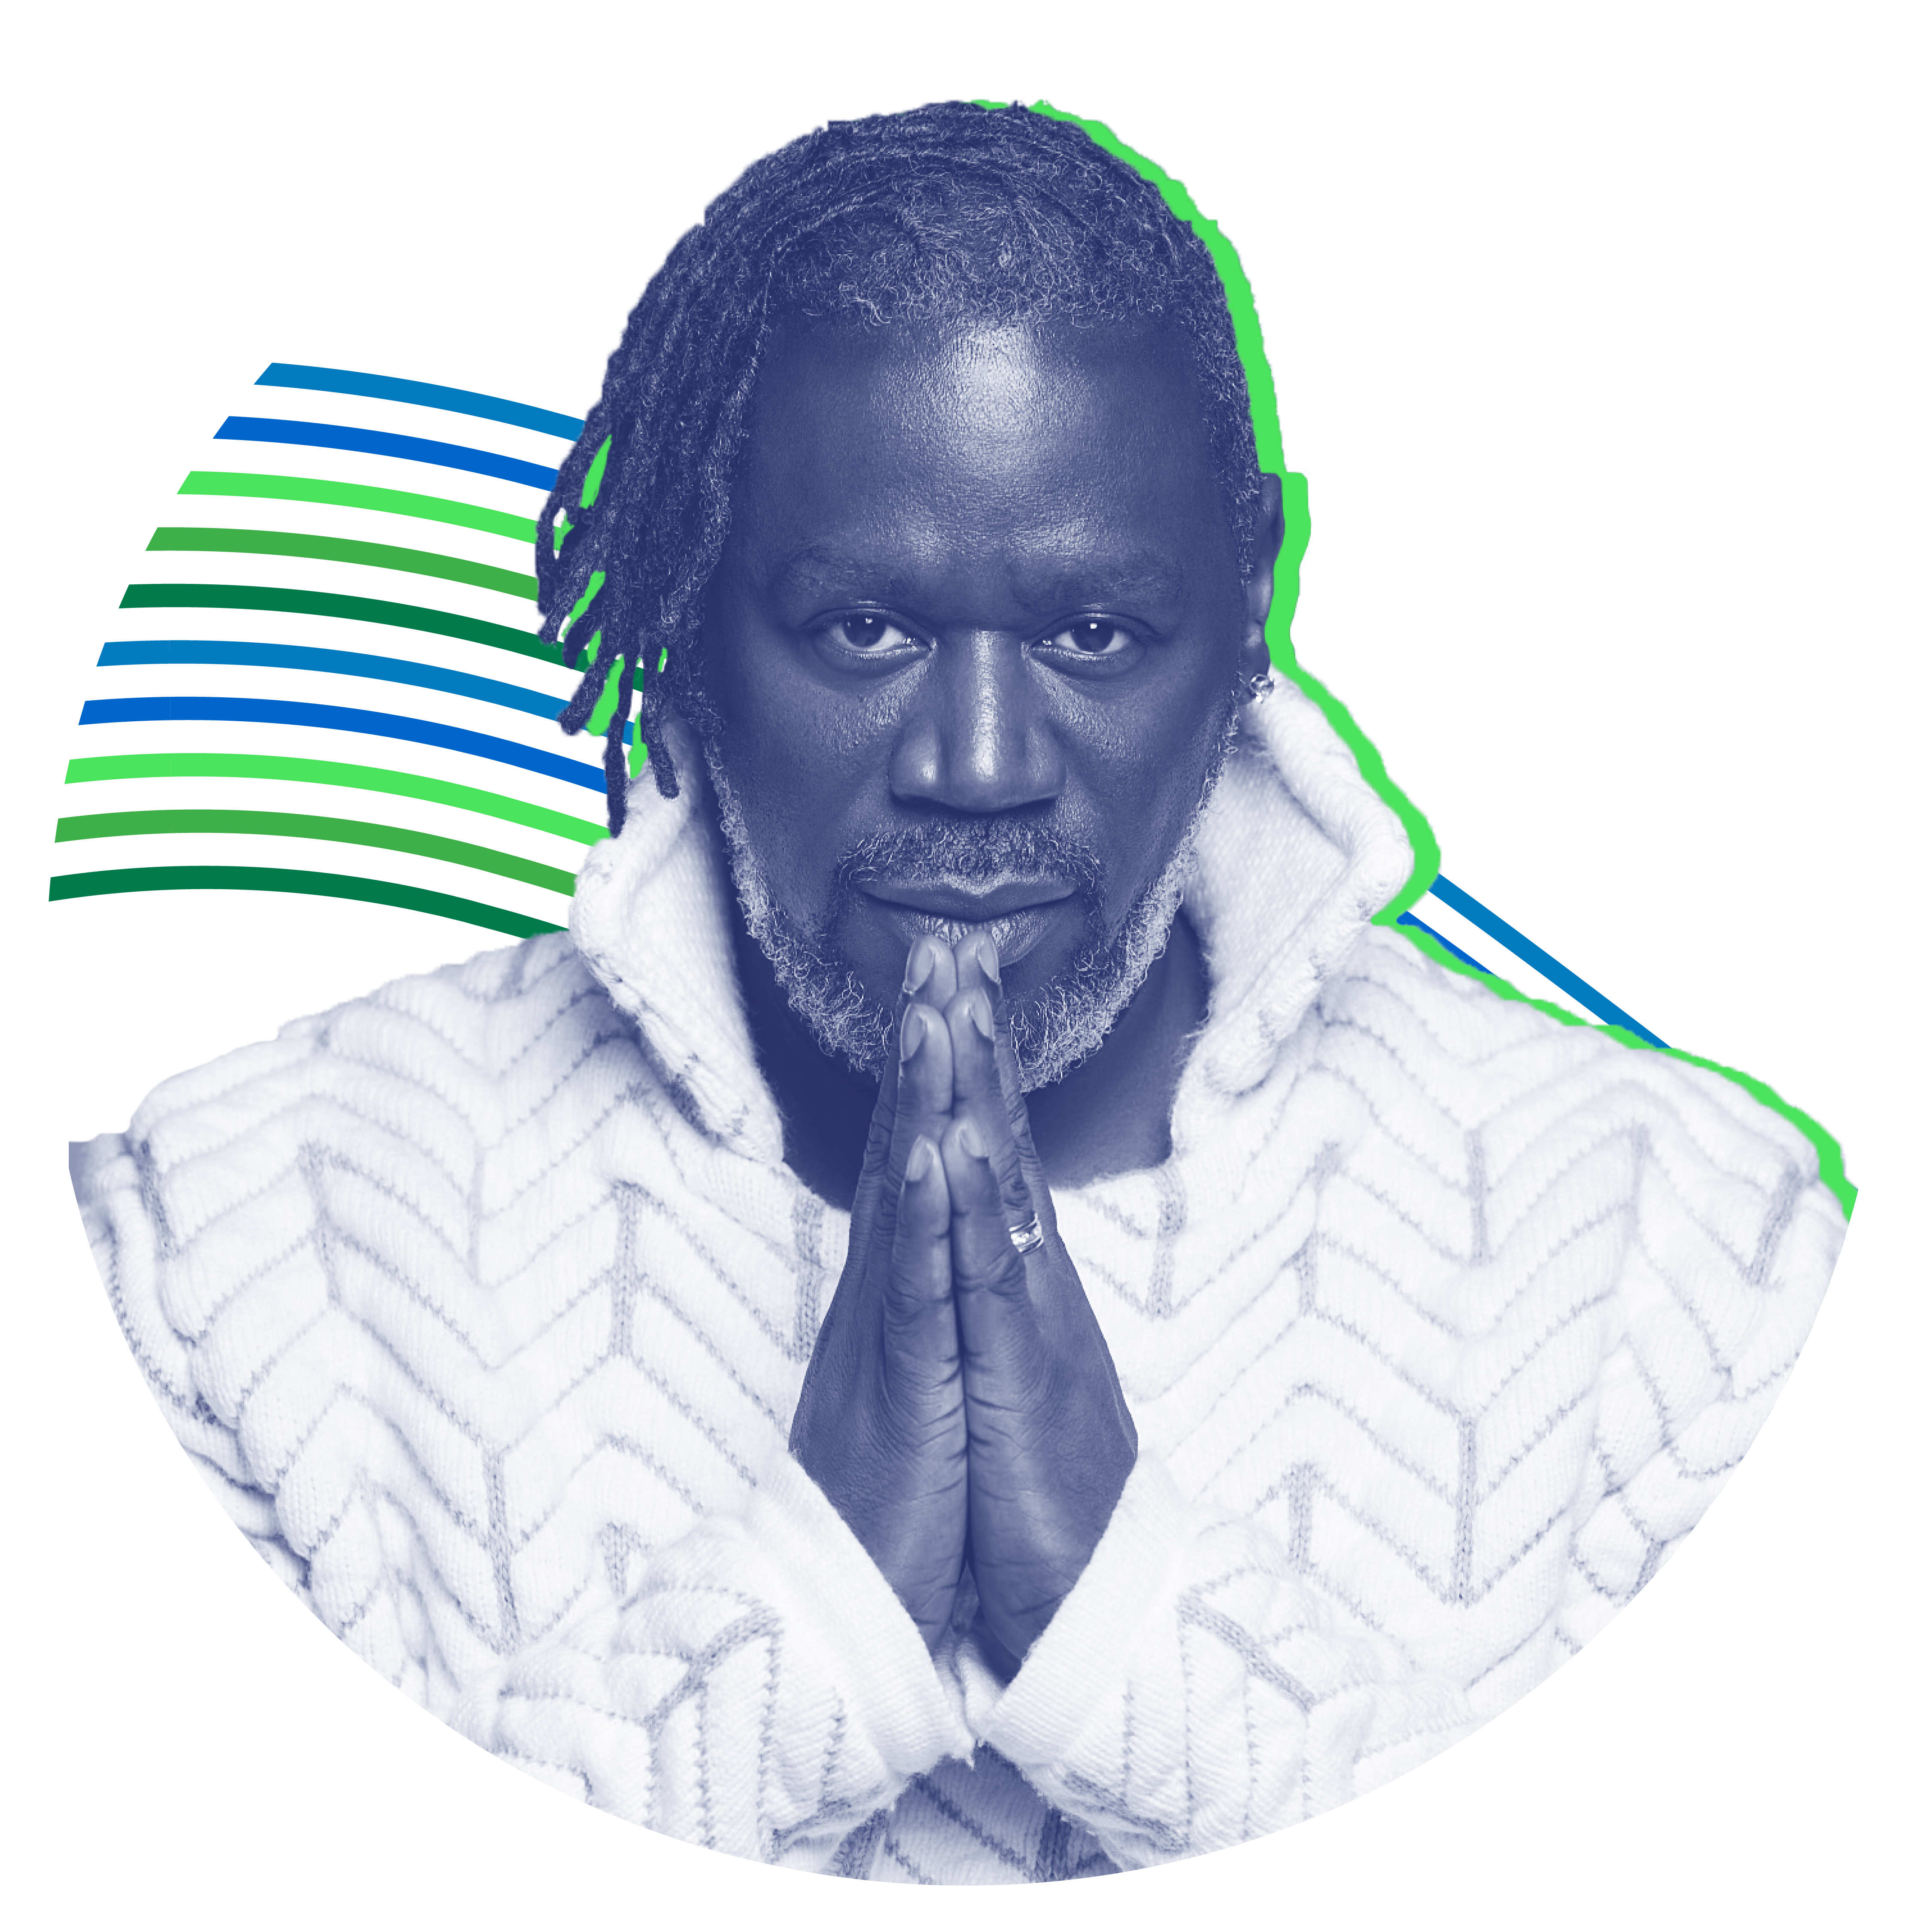 Wawa headshot with his hands in prayer position in navy blue design style with multicolored green and blue stripes in the background.